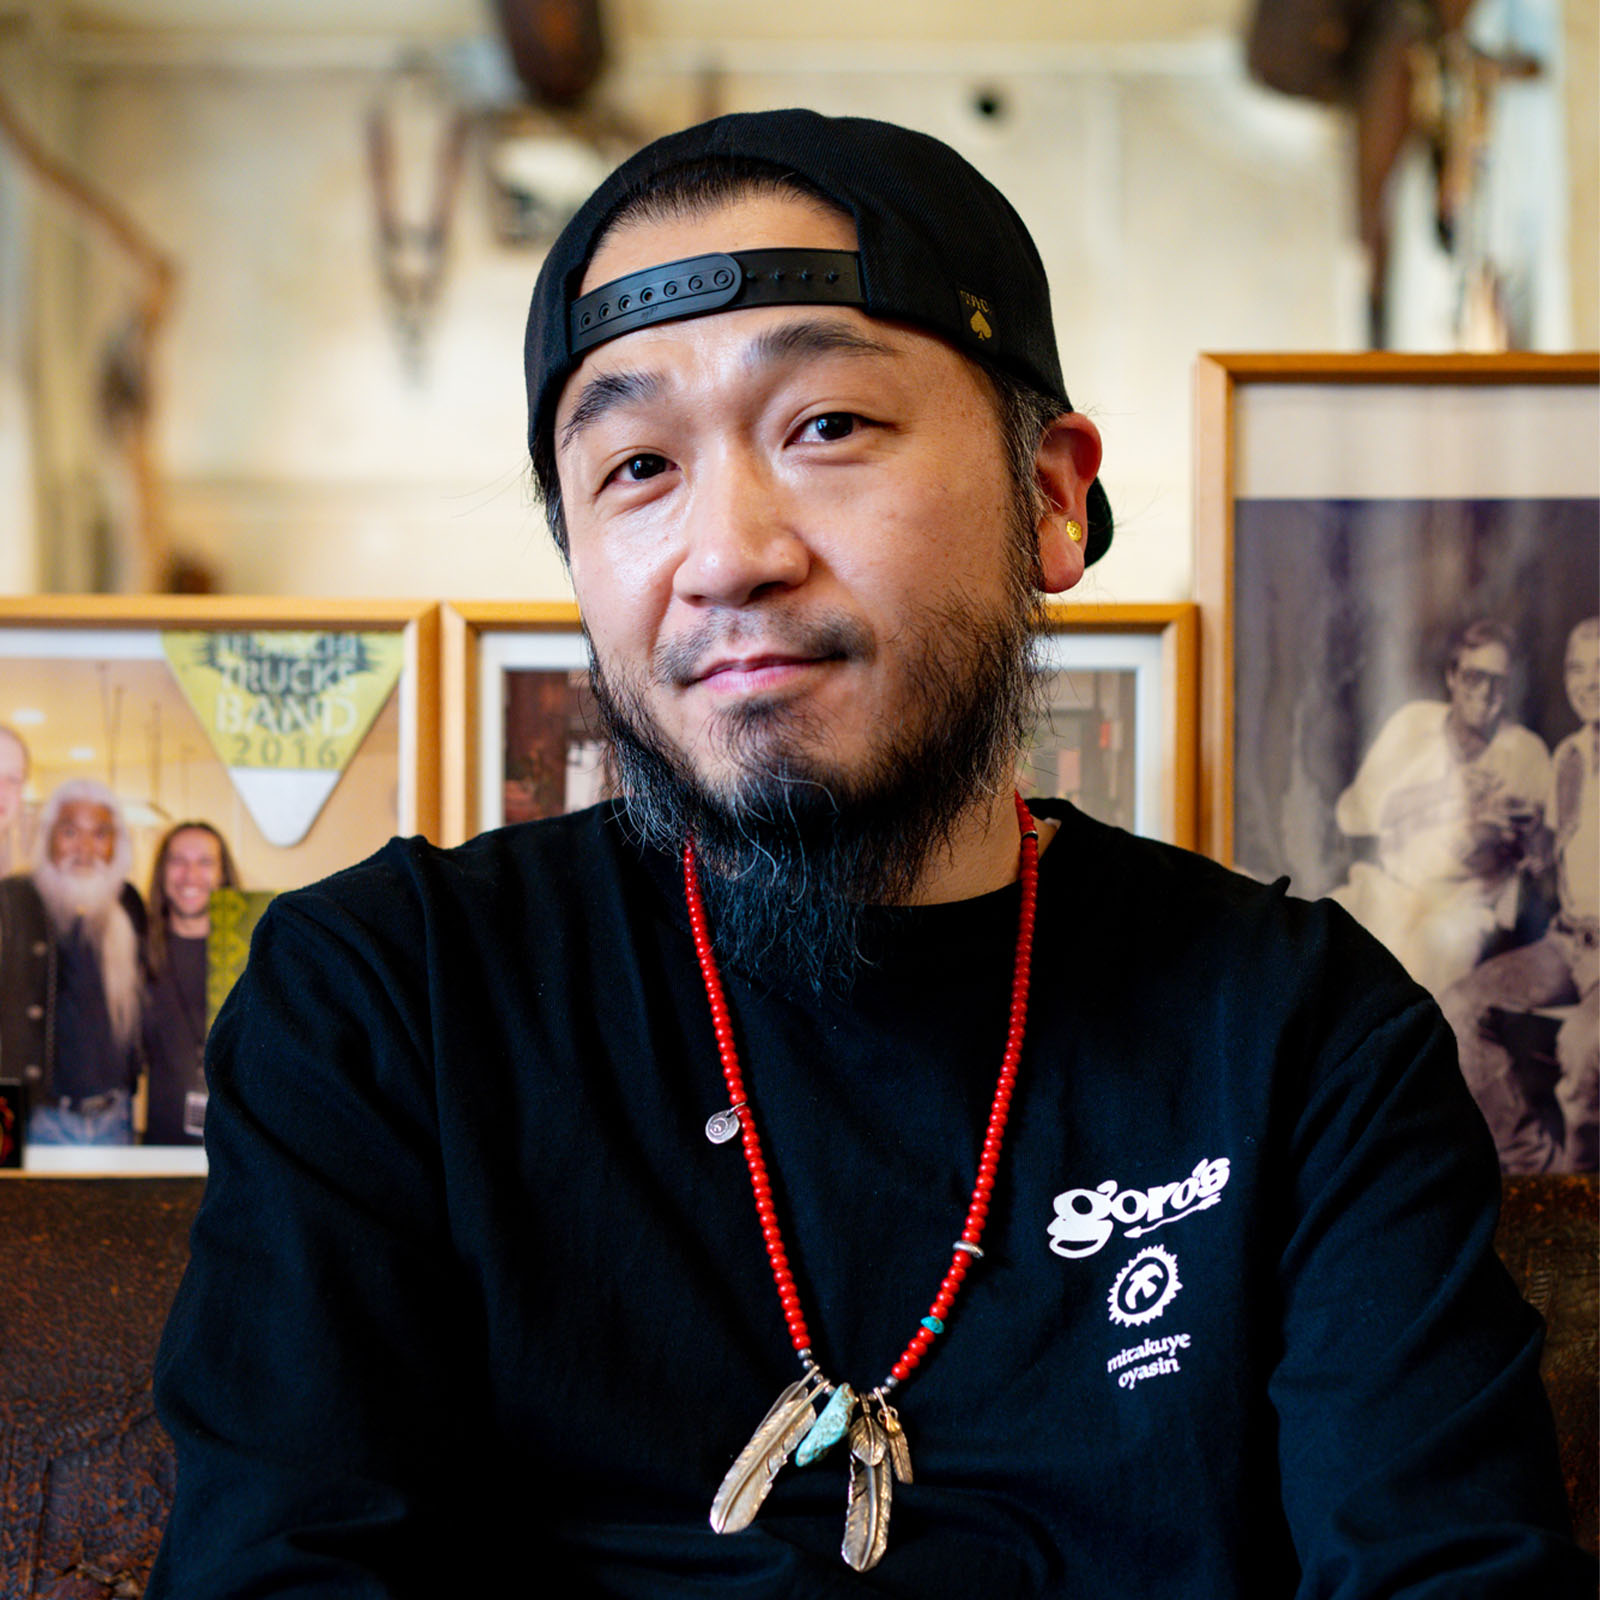 Goro's: Tokyo's cult jewelry store | Courier - Mailchimp